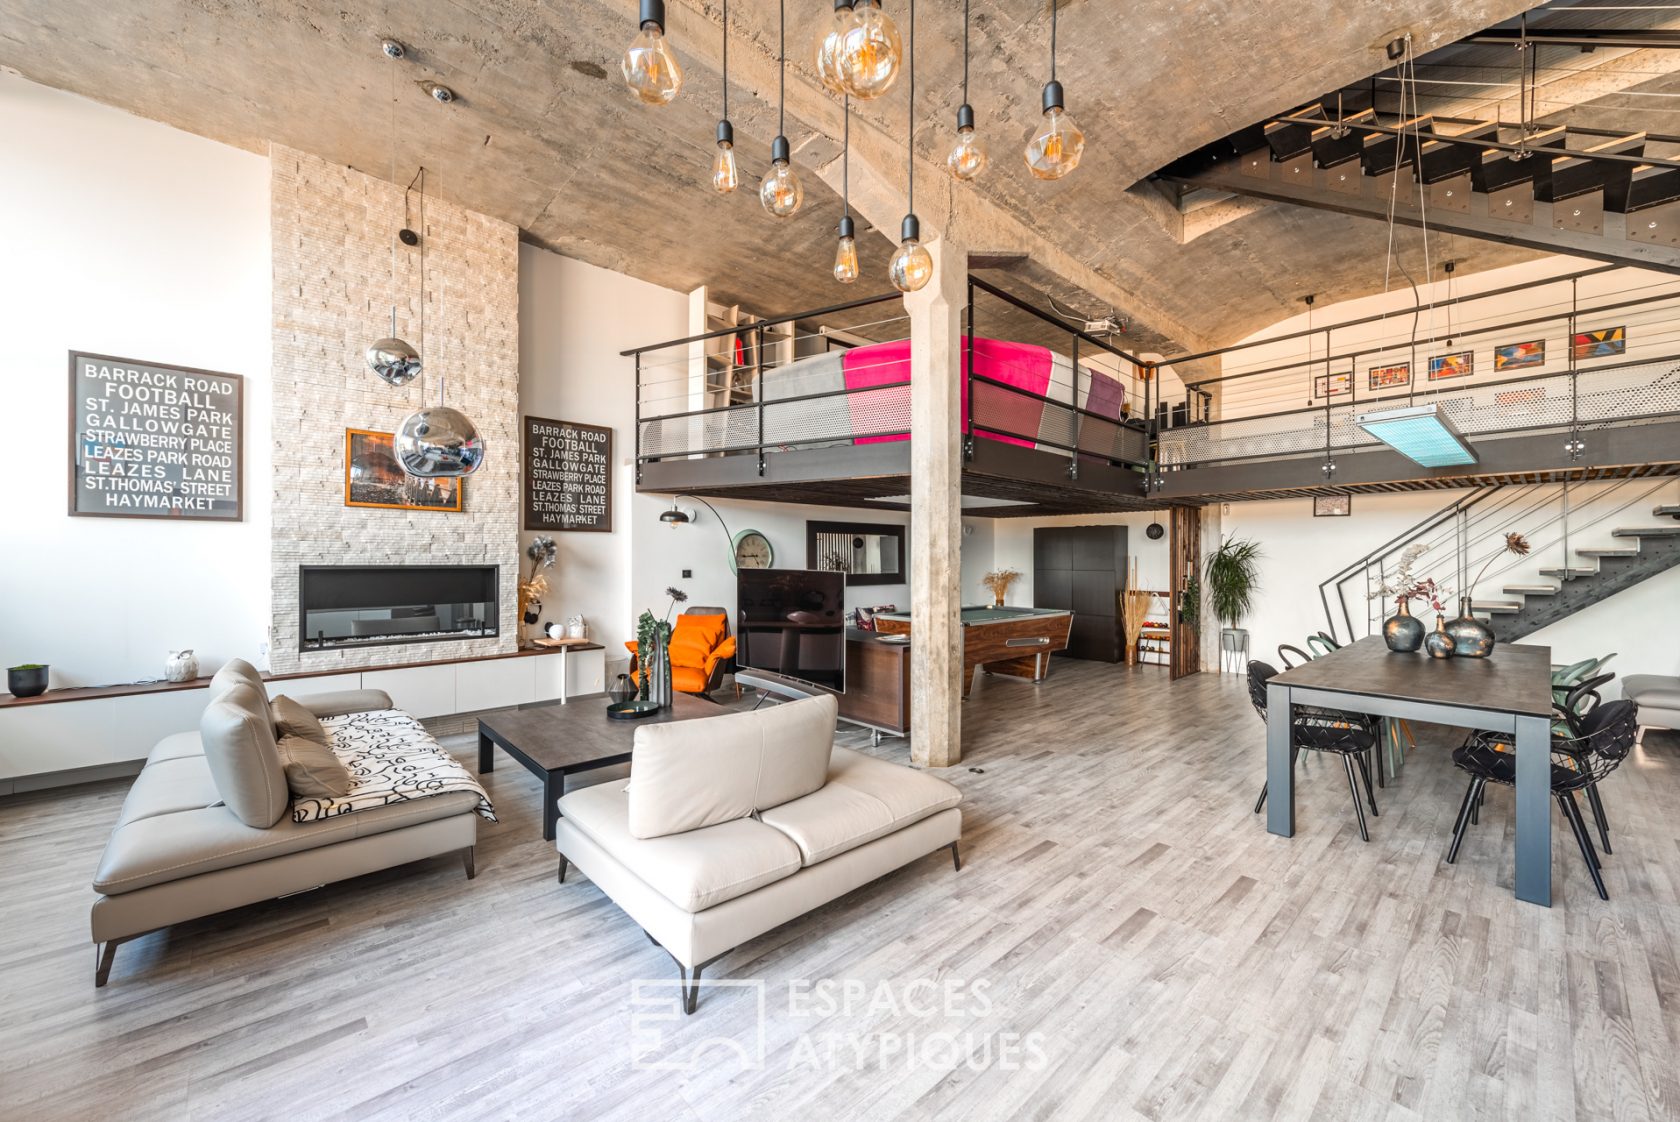 Loft with character in a building steeped in history